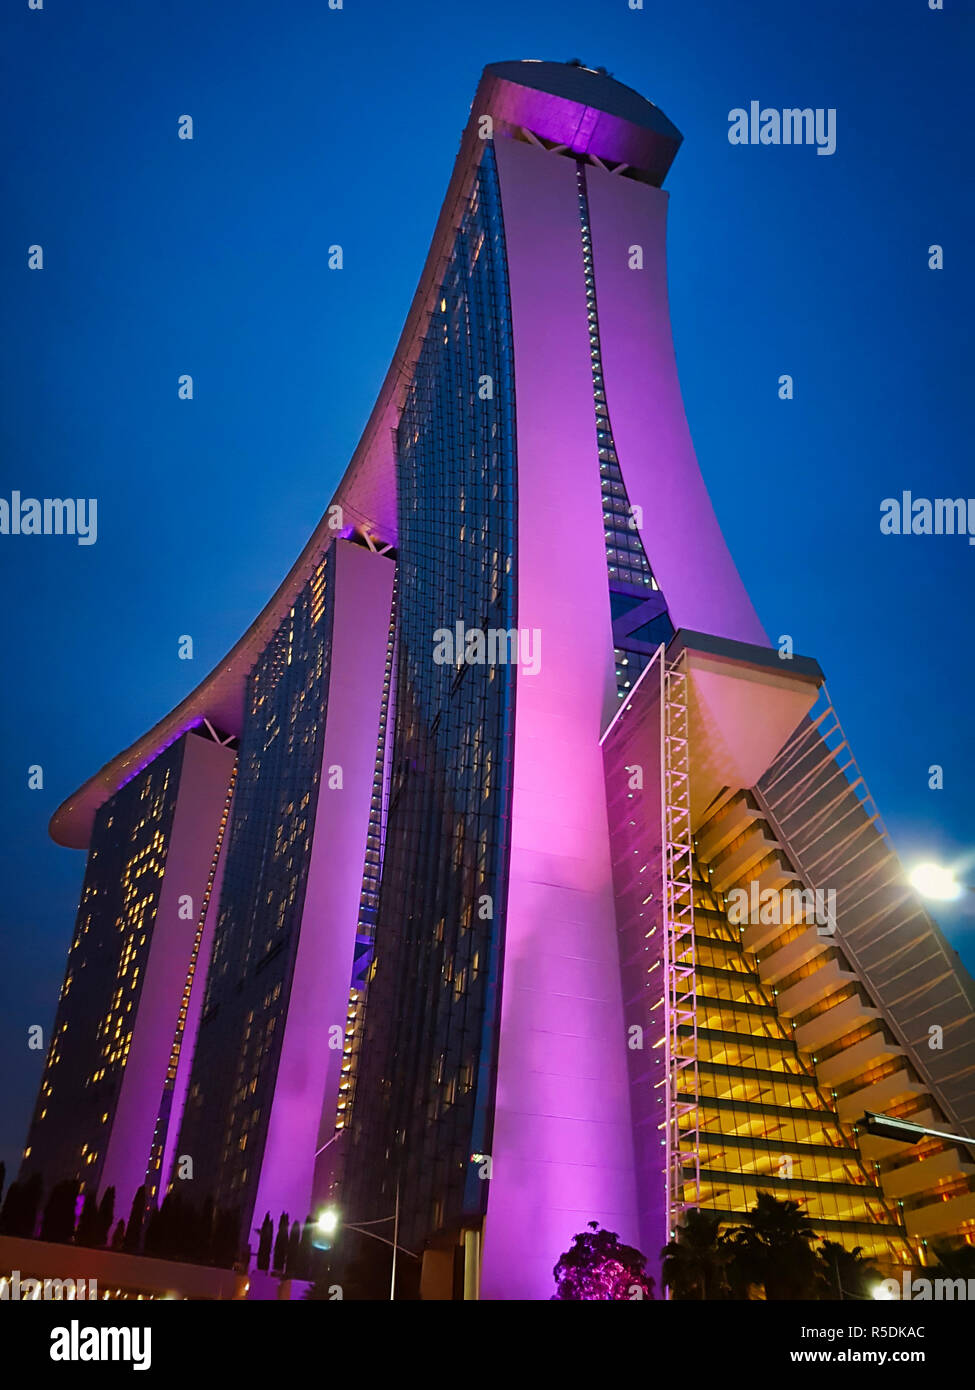 The Marina Bay Sands Building at night in a purple illumination against the dark blue night sky Stock Photo